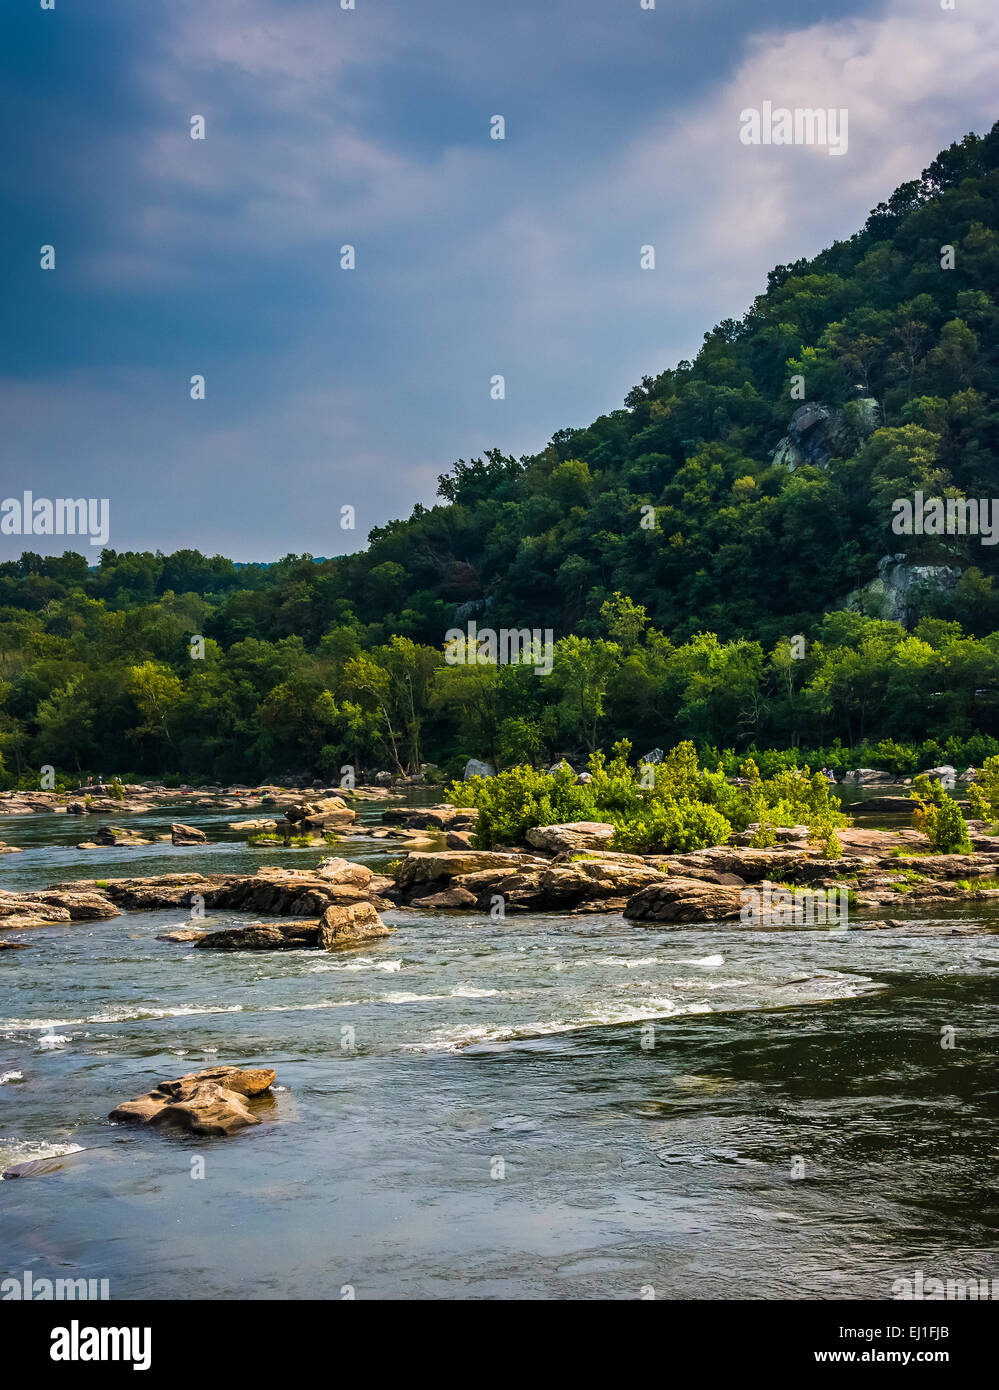 Rapids on the Potomac River in Harpers Ferry, West Virginia. Stock Photo